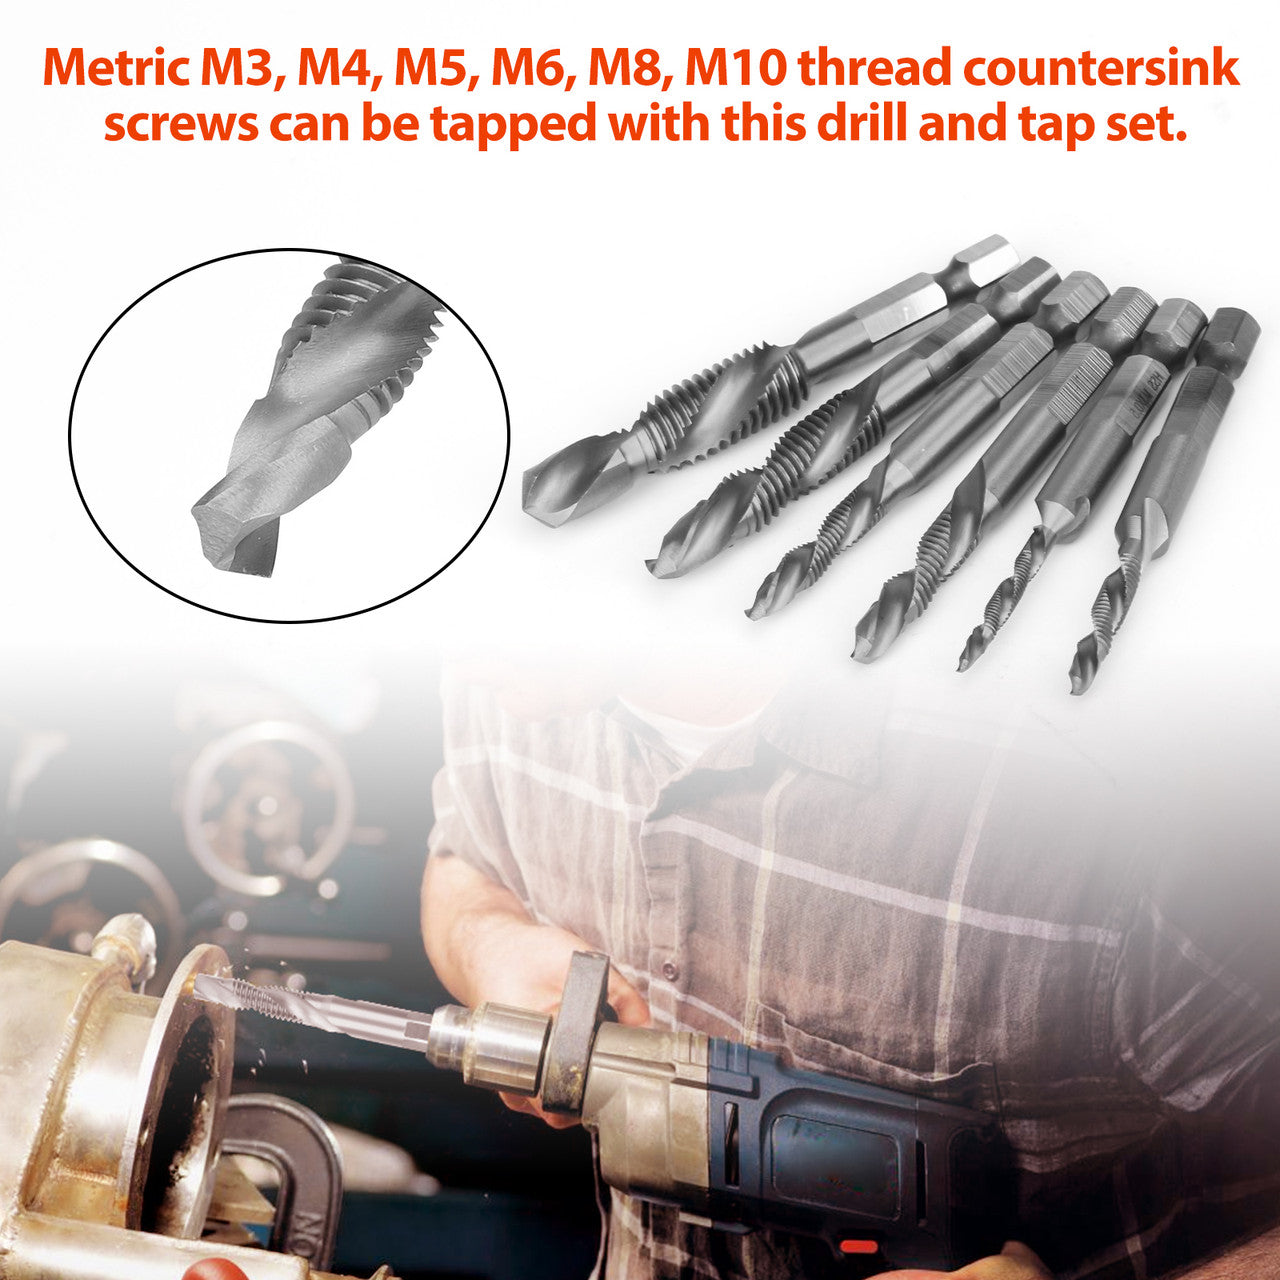 1/4 Inch Hex Shank Drill Bit and Screw Tap Set, Suitable for Drilling, Tapping, Cutting, Gold, Gold